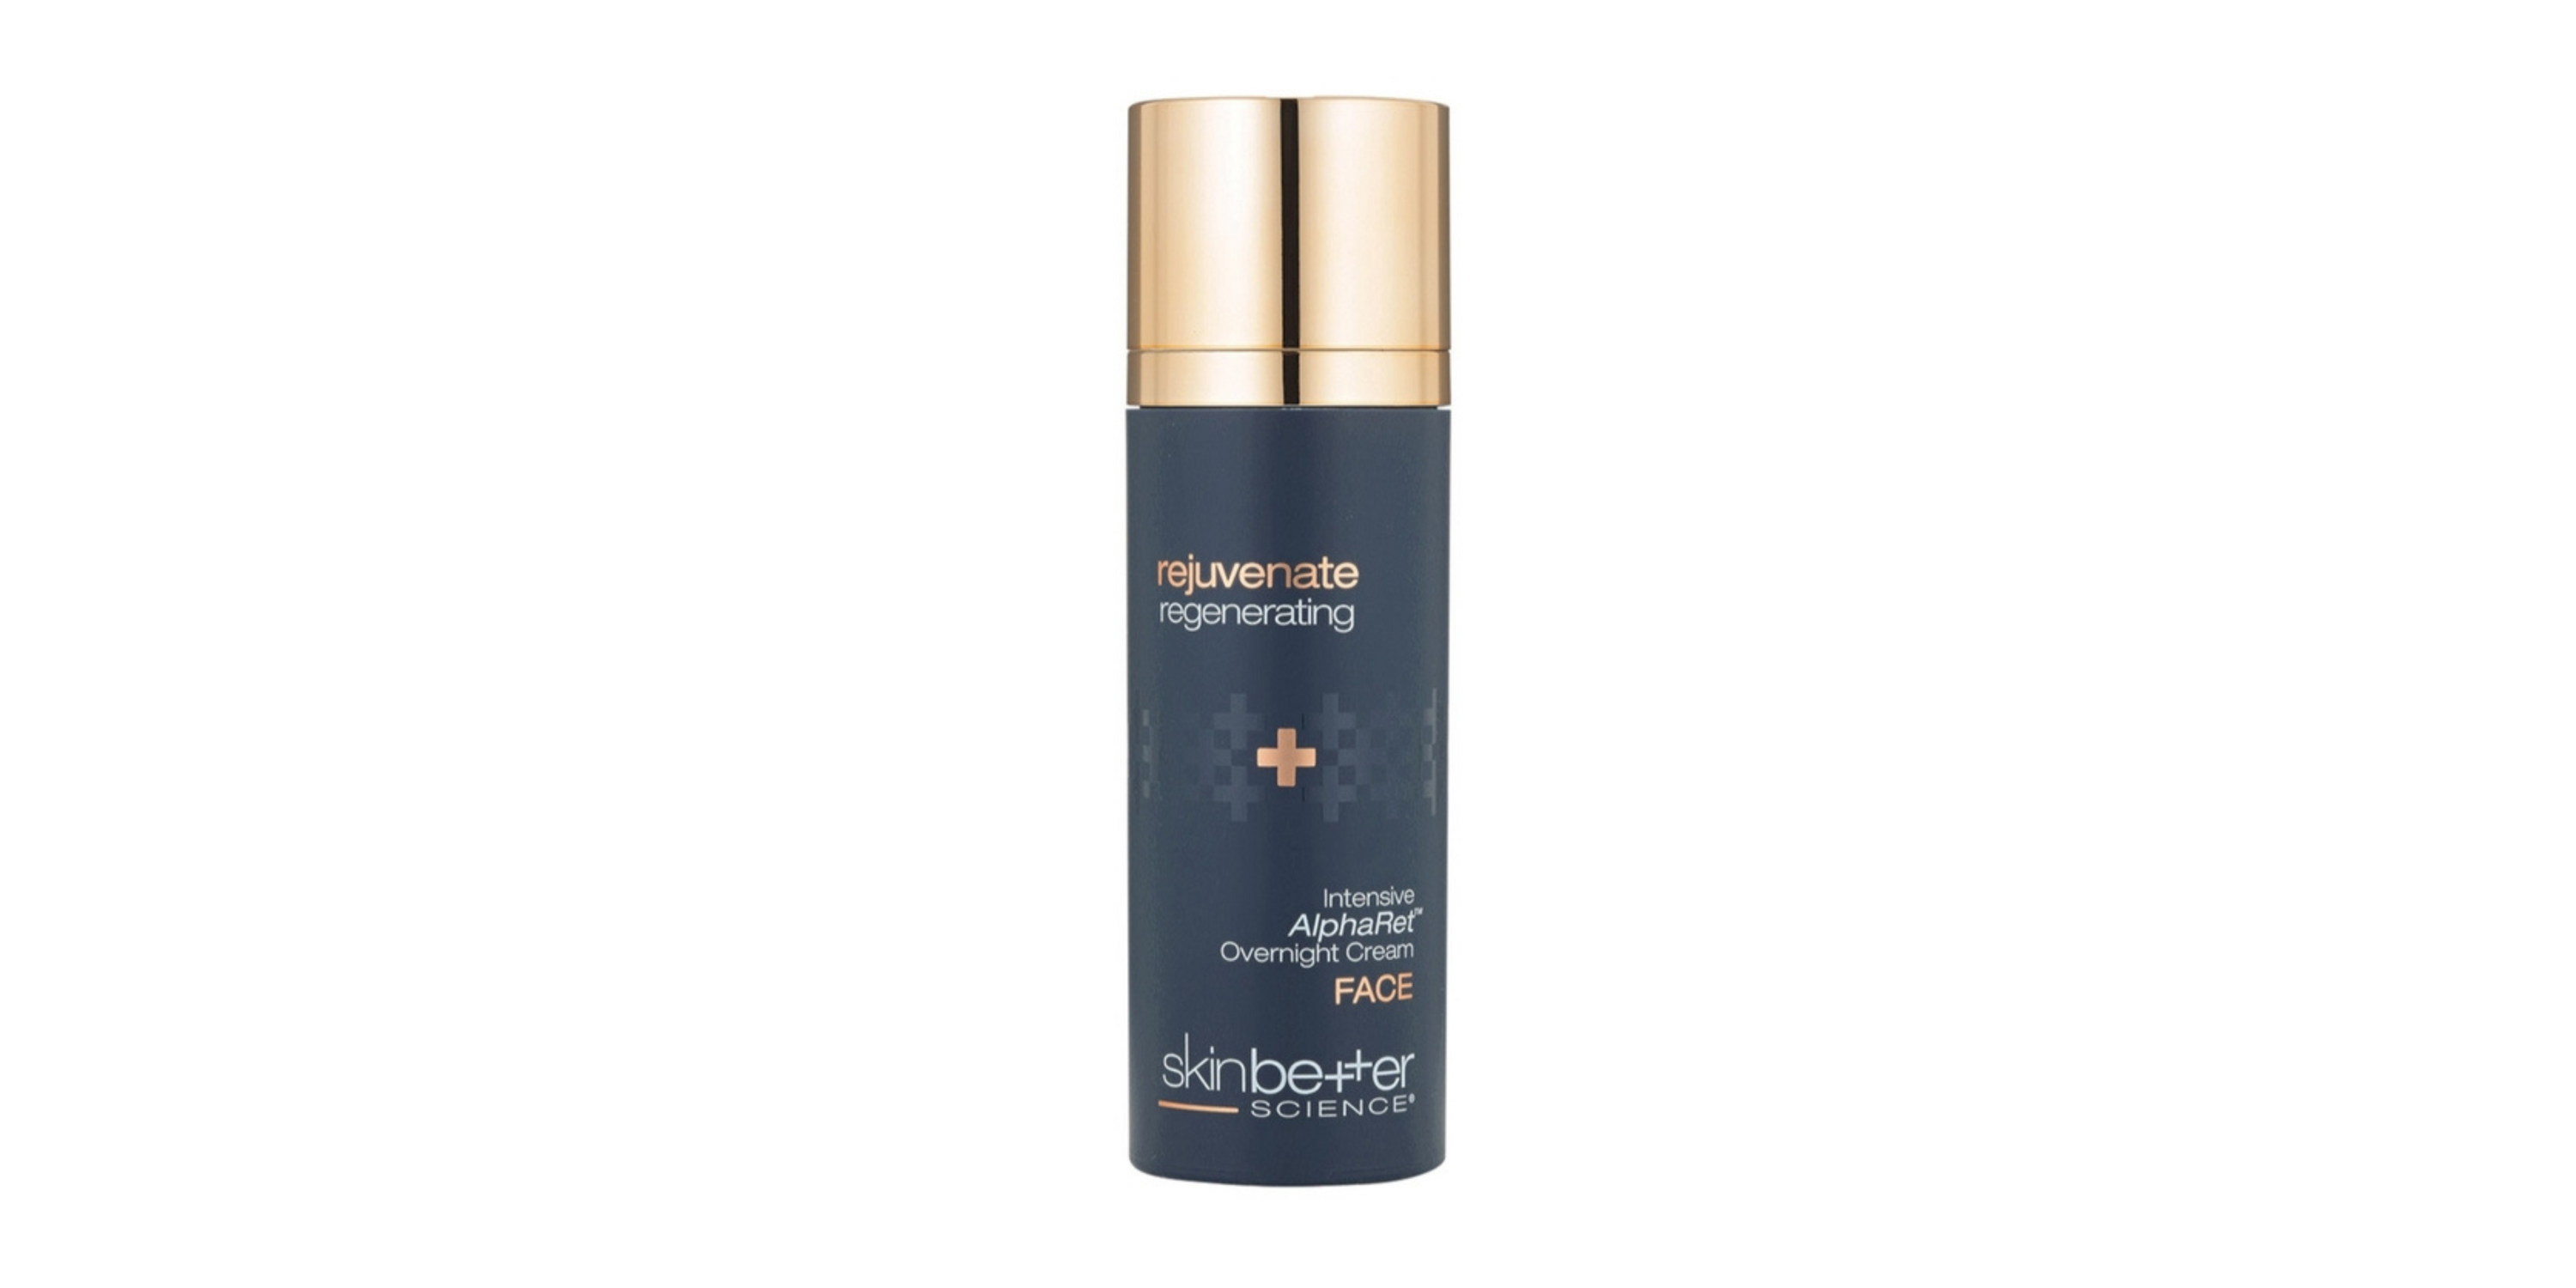 The Pros and Cons of the SKINBETTER SCIENCE Rejuvenate Intensive AlphaRet Overnight Cream FACE 50ml